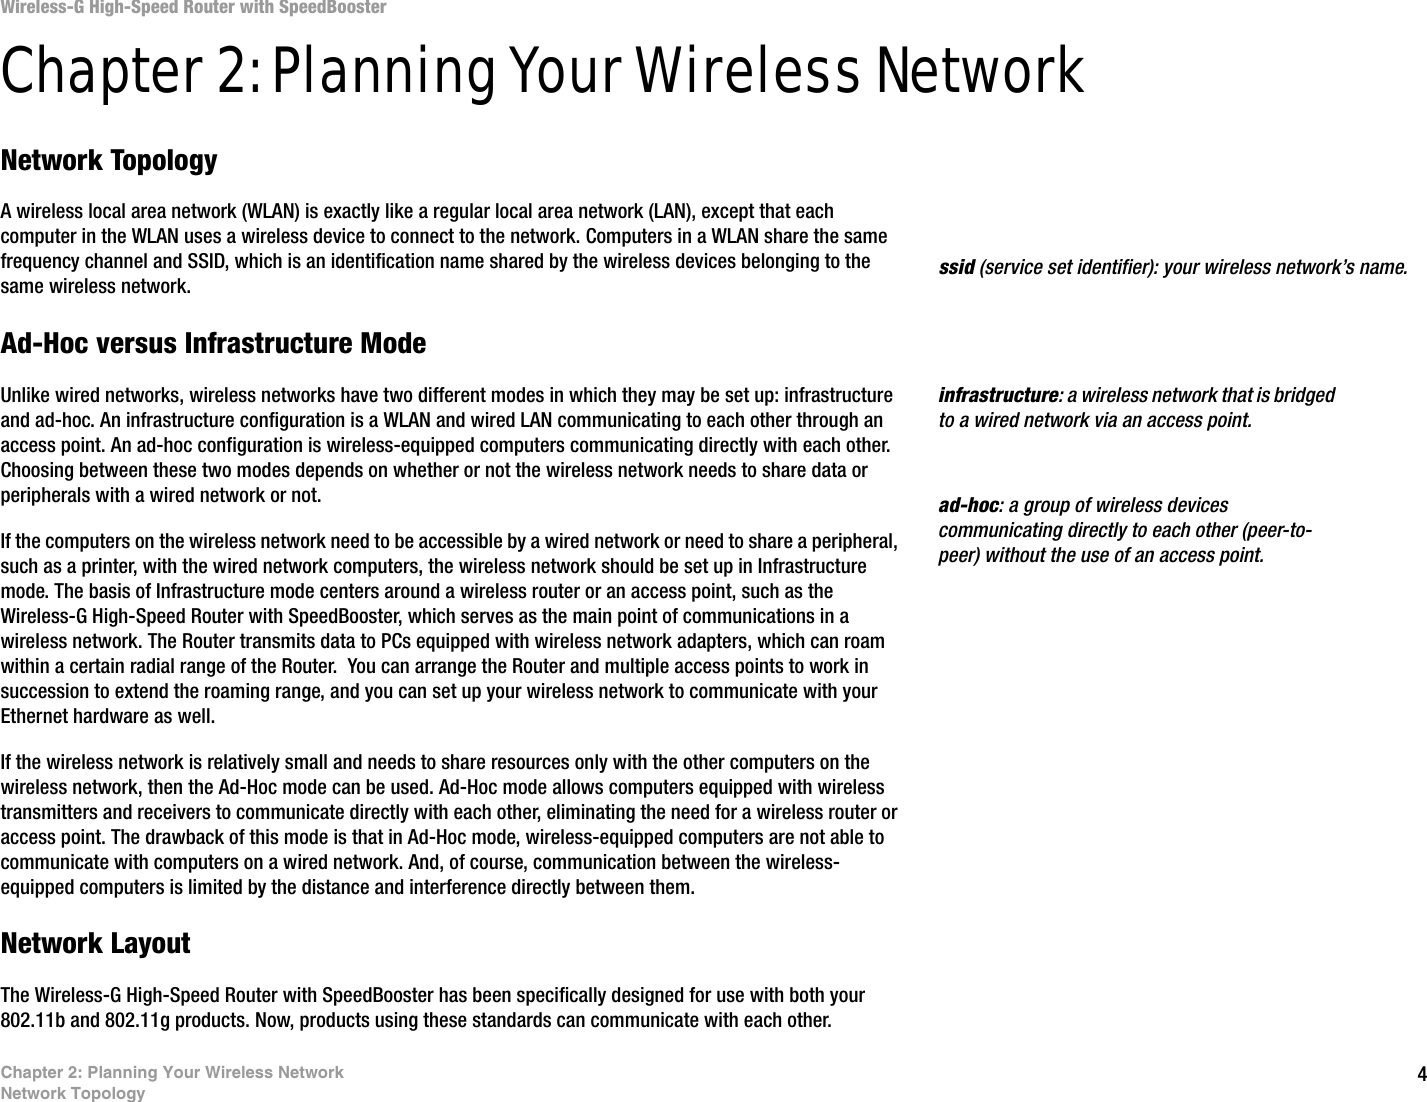 4Chapter 2: Planning Your Wireless NetworkNetwork TopologyWireless-G High-Speed Router with SpeedBoosterChapter 2: Planning Your Wireless NetworkNetwork TopologyA wireless local area network (WLAN) is exactly like a regular local area network (LAN), except that each computer in the WLAN uses a wireless device to connect to the network. Computers in a WLAN share the same frequency channel and SSID, which is an identification name shared by the wireless devices belonging to the same wireless network.Ad-Hoc versus Infrastructure ModeUnlike wired networks, wireless networks have two different modes in which they may be set up: infrastructure and ad-hoc. An infrastructure configuration is a WLAN and wired LAN communicating to each other through an access point. An ad-hoc configuration is wireless-equipped computers communicating directly with each other. Choosing between these two modes depends on whether or not the wireless network needs to share data or peripherals with a wired network or not. If the computers on the wireless network need to be accessible by a wired network or need to share a peripheral, such as a printer, with the wired network computers, the wireless network should be set up in Infrastructure mode. The basis of Infrastructure mode centers around a wireless router or an access point, such as the Wireless-G High-Speed Router with SpeedBooster, which serves as the main point of communications in a wireless network. The Router transmits data to PCs equipped with wireless network adapters, which can roam within a certain radial range of the Router.  You can arrange the Router and multiple access points to work in succession to extend the roaming range, and you can set up your wireless network to communicate with your Ethernet hardware as well. If the wireless network is relatively small and needs to share resources only with the other computers on the wireless network, then the Ad-Hoc mode can be used. Ad-Hoc mode allows computers equipped with wireless transmitters and receivers to communicate directly with each other, eliminating the need for a wireless router or access point. The drawback of this mode is that in Ad-Hoc mode, wireless-equipped computers are not able to communicate with computers on a wired network. And, of course, communication between the wireless-equipped computers is limited by the distance and interference directly between them. Network LayoutThe Wireless-G High-Speed Router with SpeedBooster has been specifically designed for use with both your 802.11b and 802.11g products. Now, products using these standards can communicate with each other.infrastructure: a wireless network that is bridged to a wired network via an access point.ssid (service set identifier): your wireless network’s name.ad-hoc: a group of wireless devices communicating directly to each other (peer-to-peer) without the use of an access point.